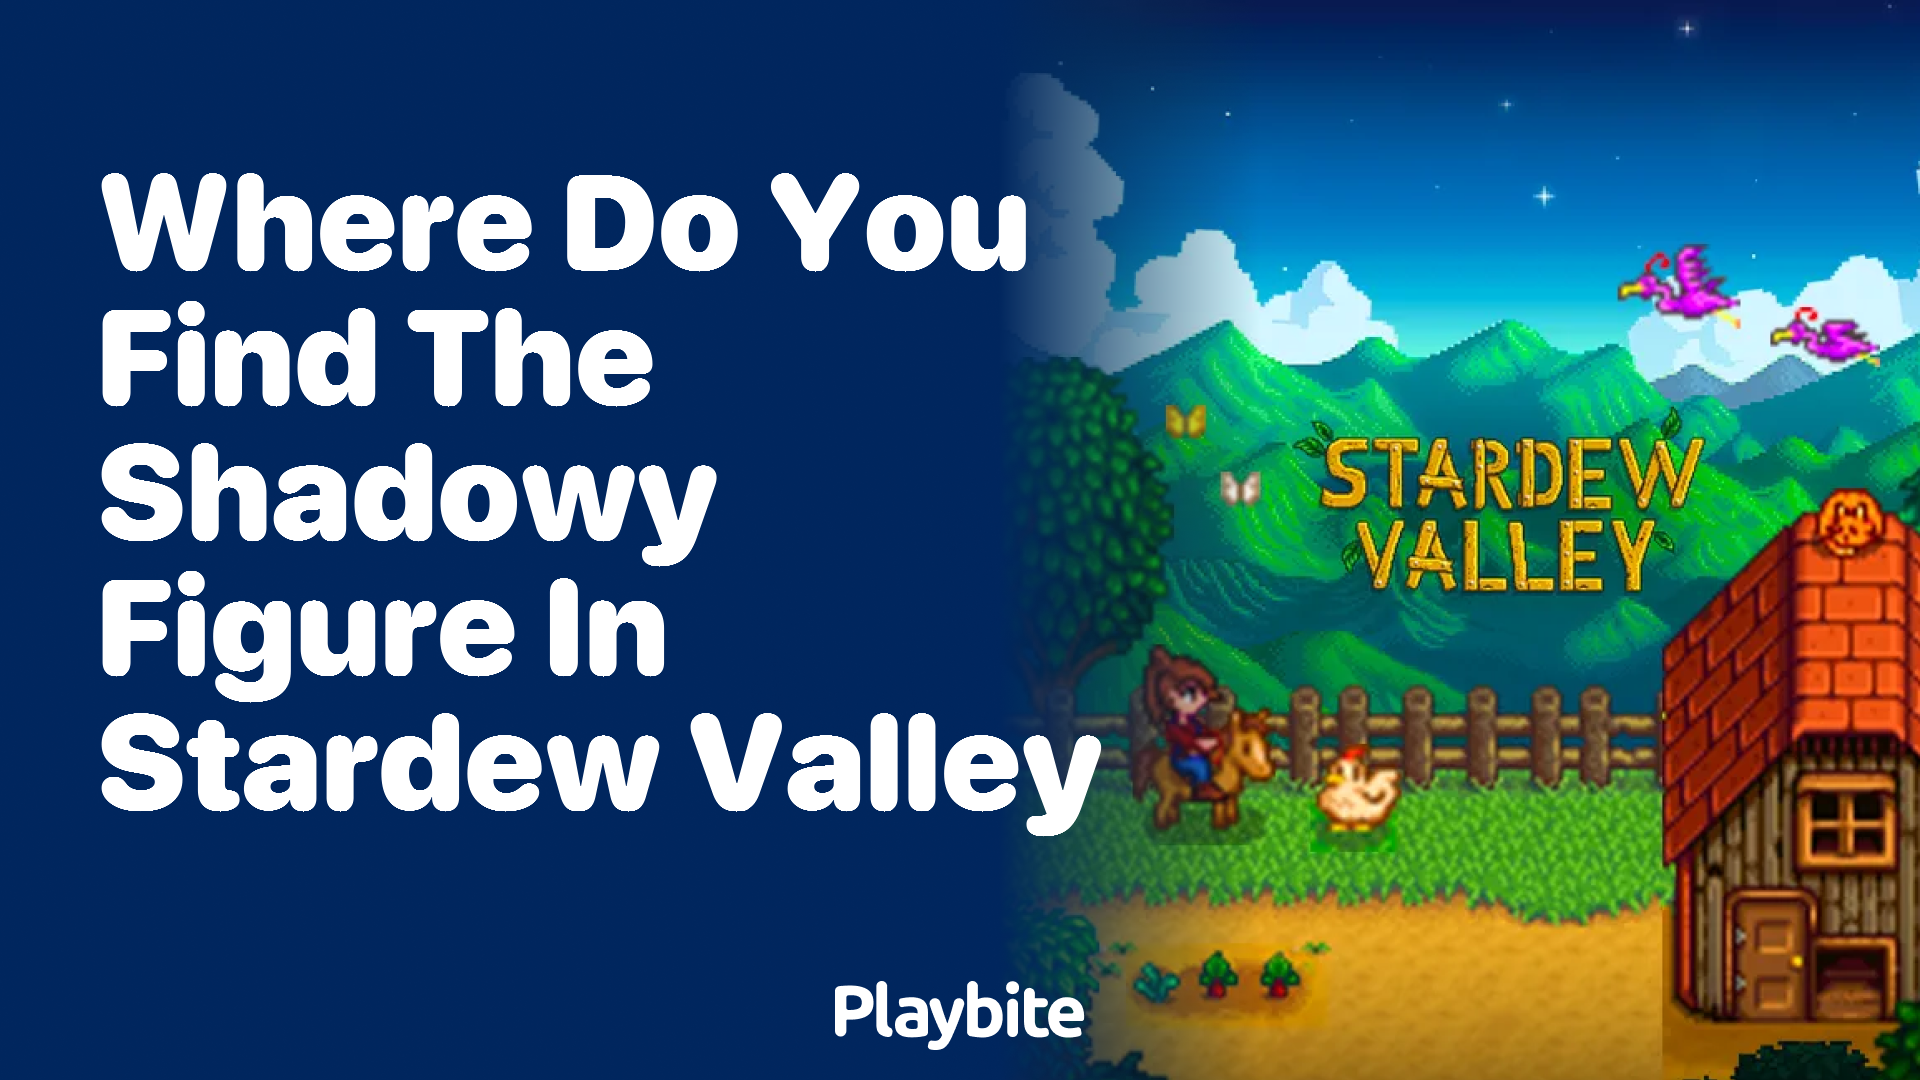 Where Do You Find the Shadowy Figure in Stardew Valley?